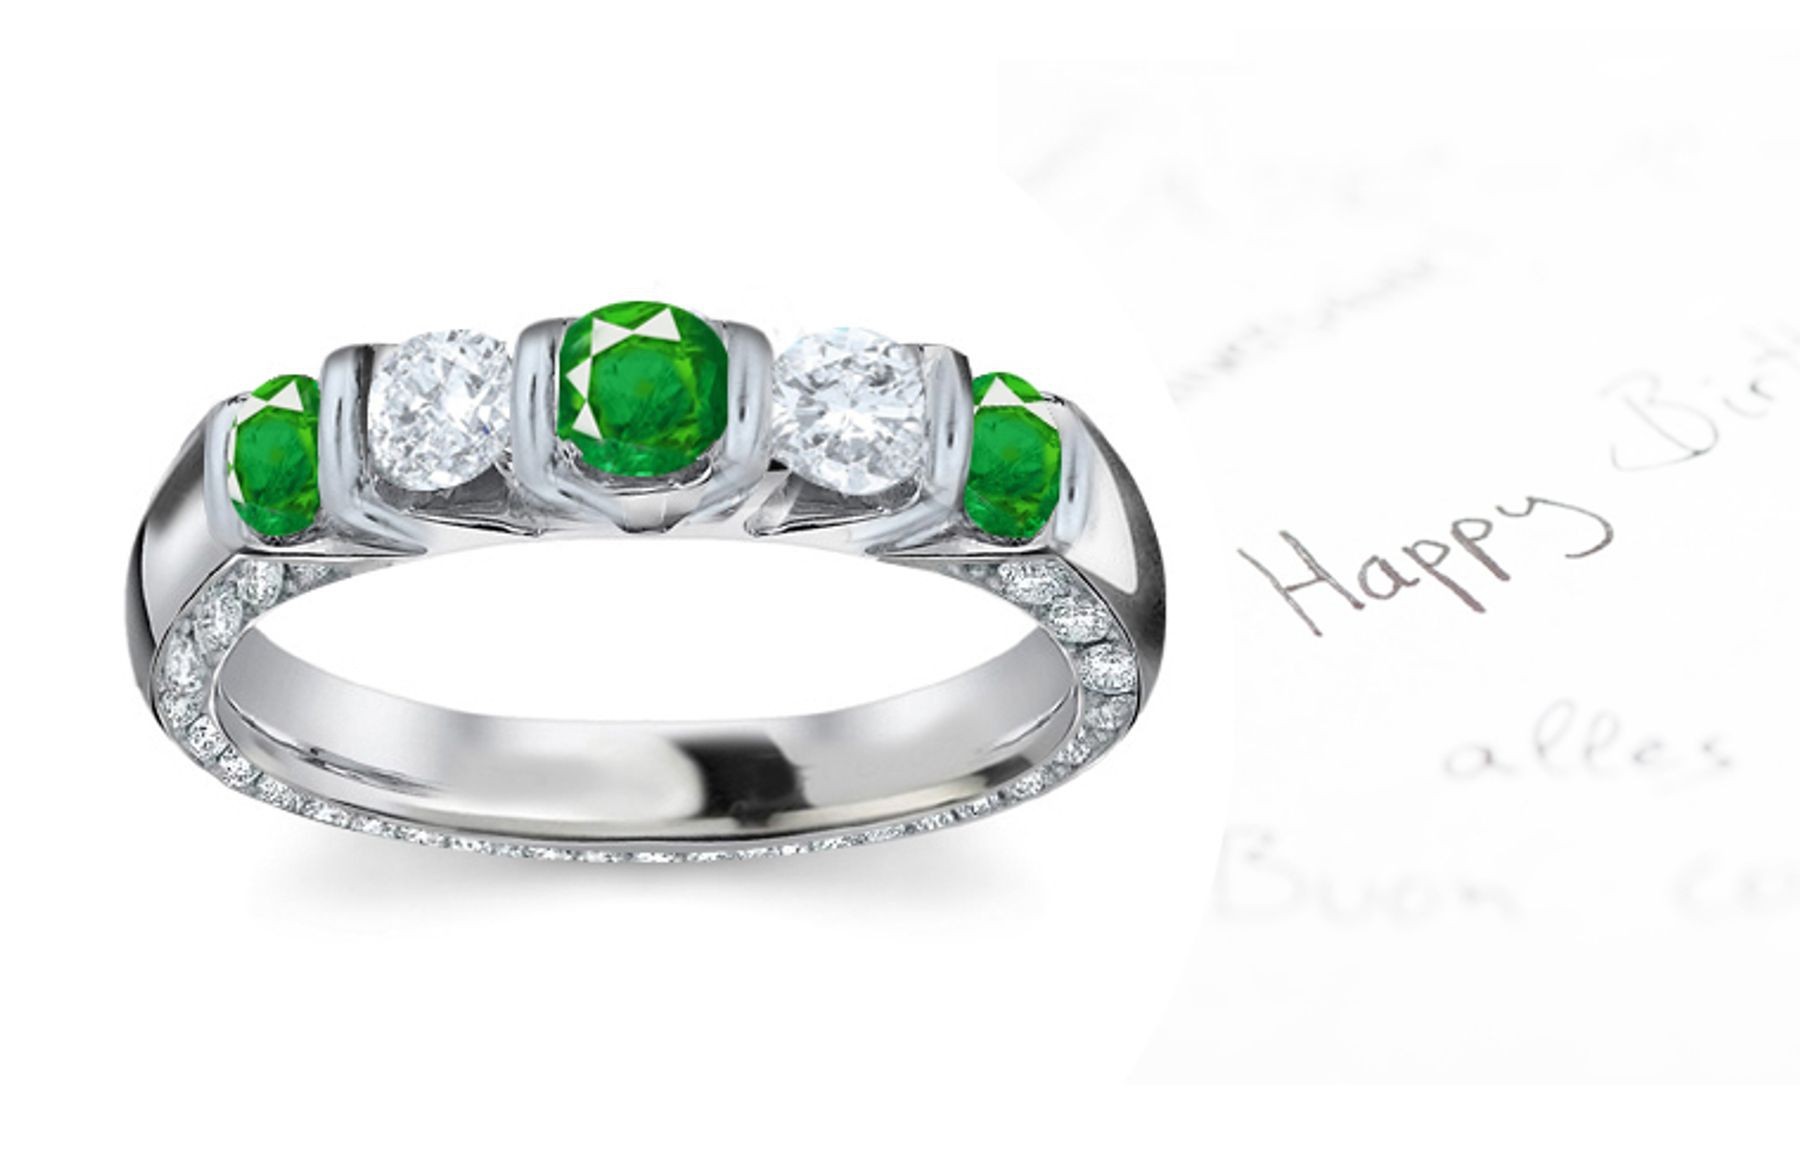 The Most Magnificient: 14k Gold & Diamond Emerald Five Stone Ring